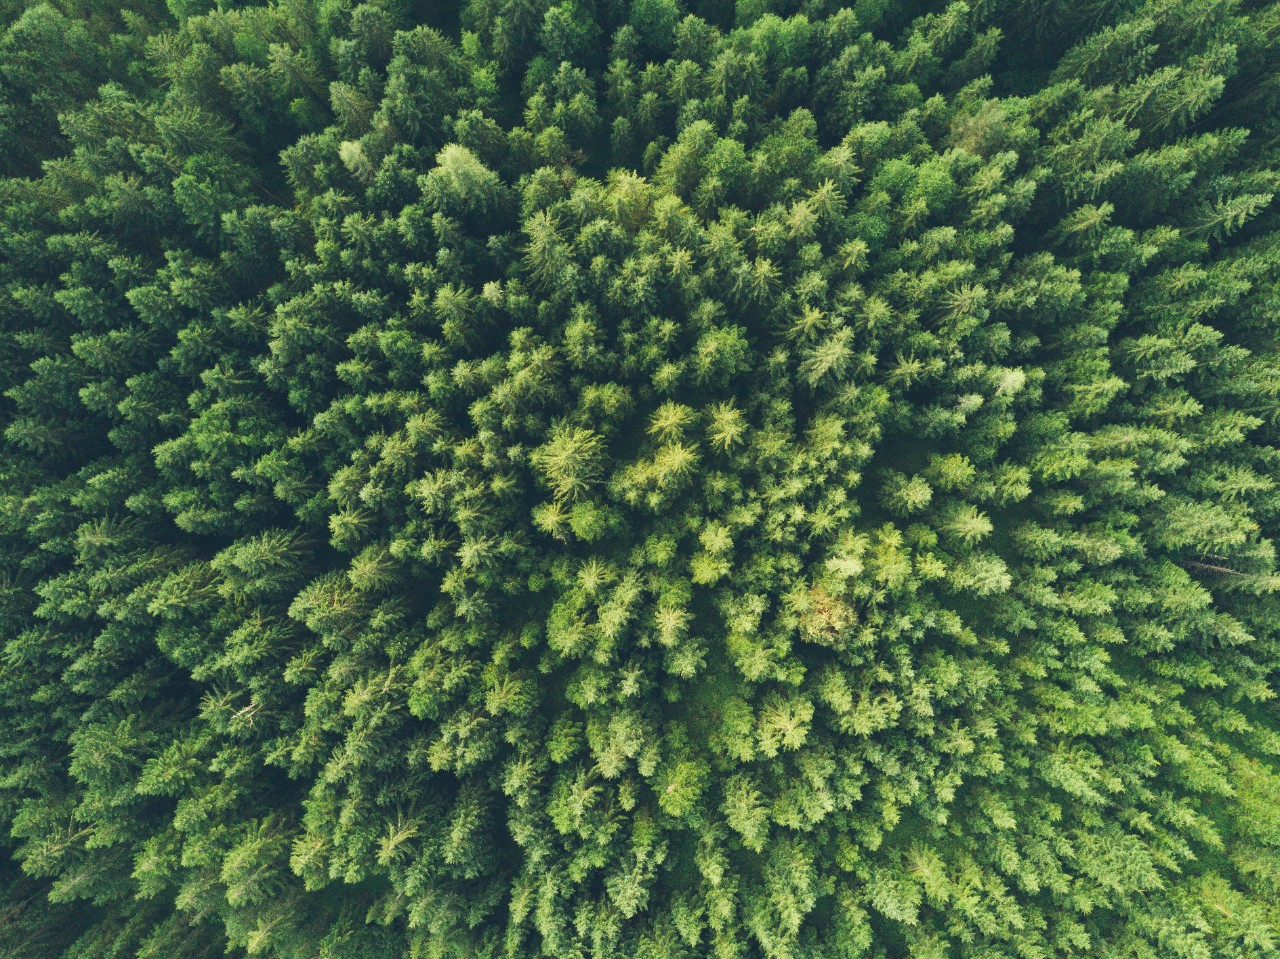 Ariel view of a forest